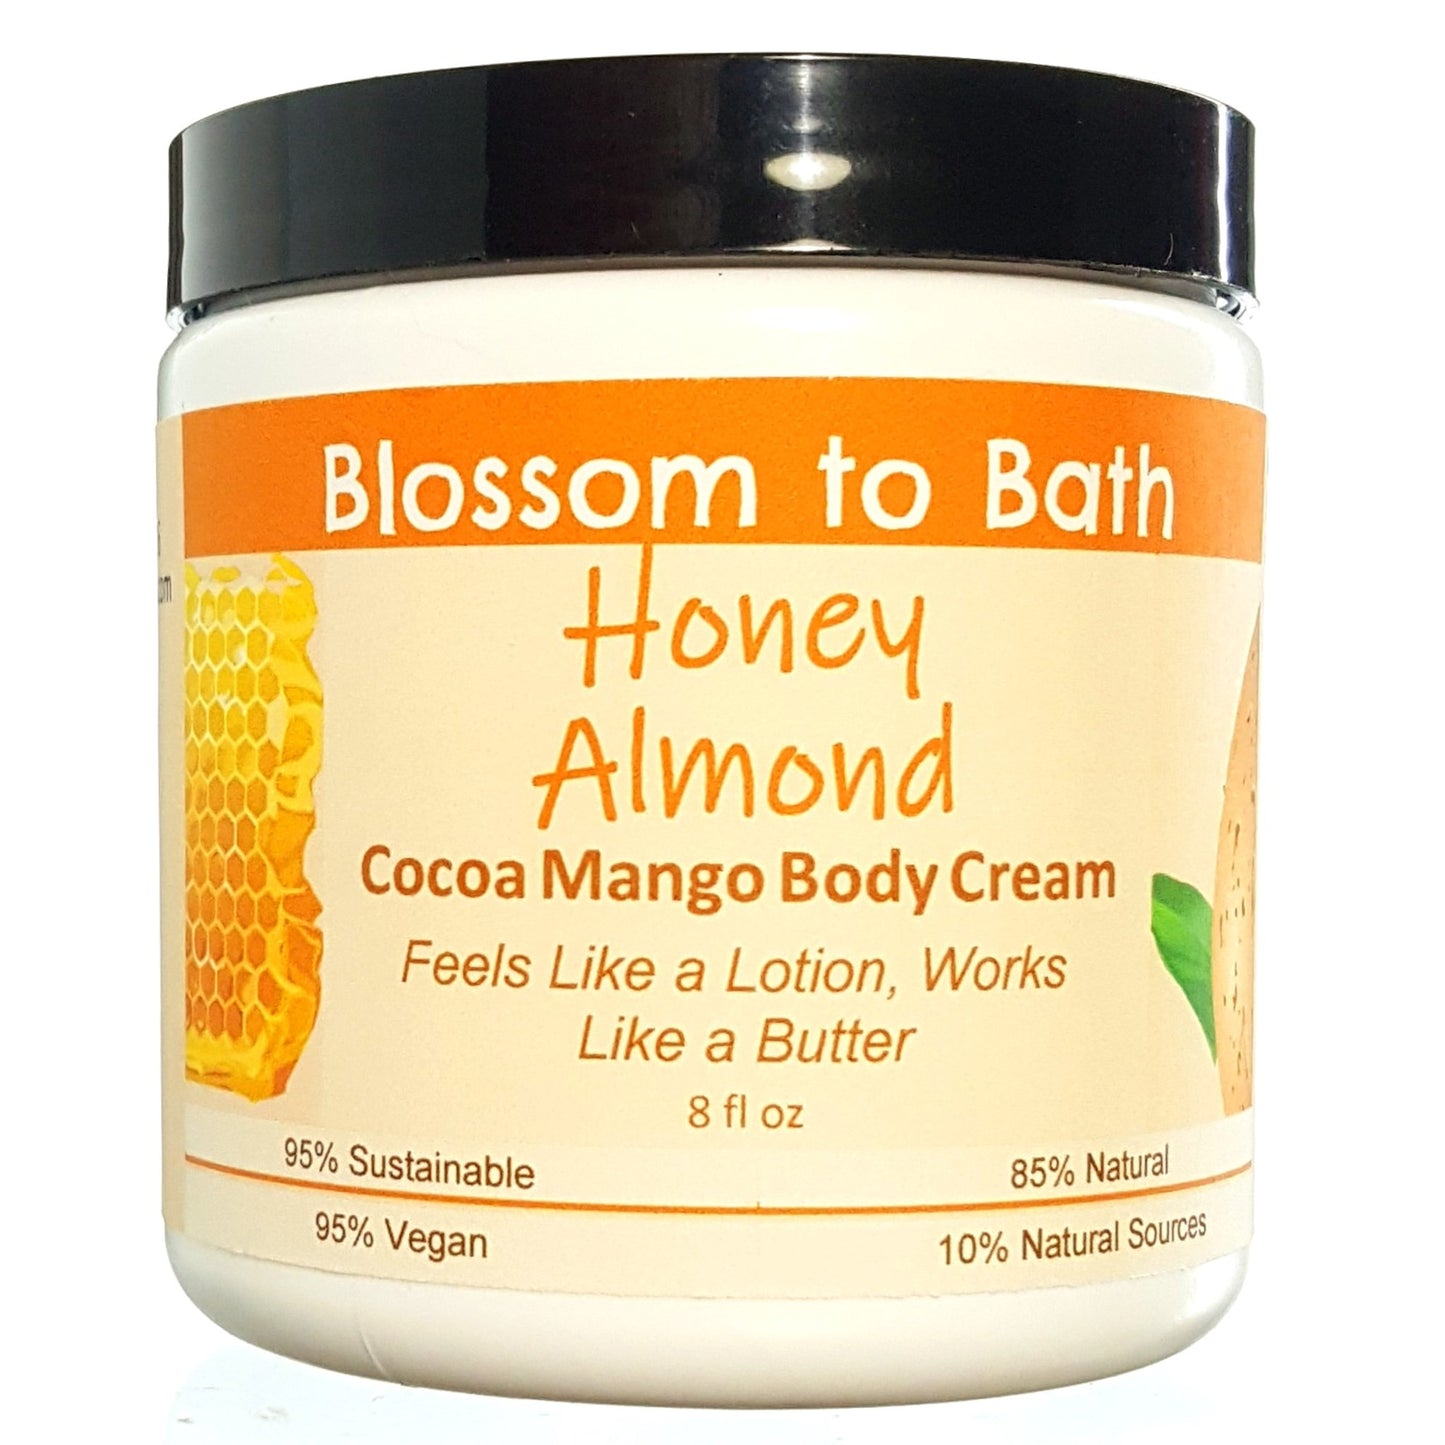 Buy Blossom to Bath Honey Almond Cocoa Mango Body Cream from Flowersong Soap Studio.  Rich organic butters  soften and moisturize even the roughest skin all day  Sweetly fragrant nutty almond drizzled with honey.